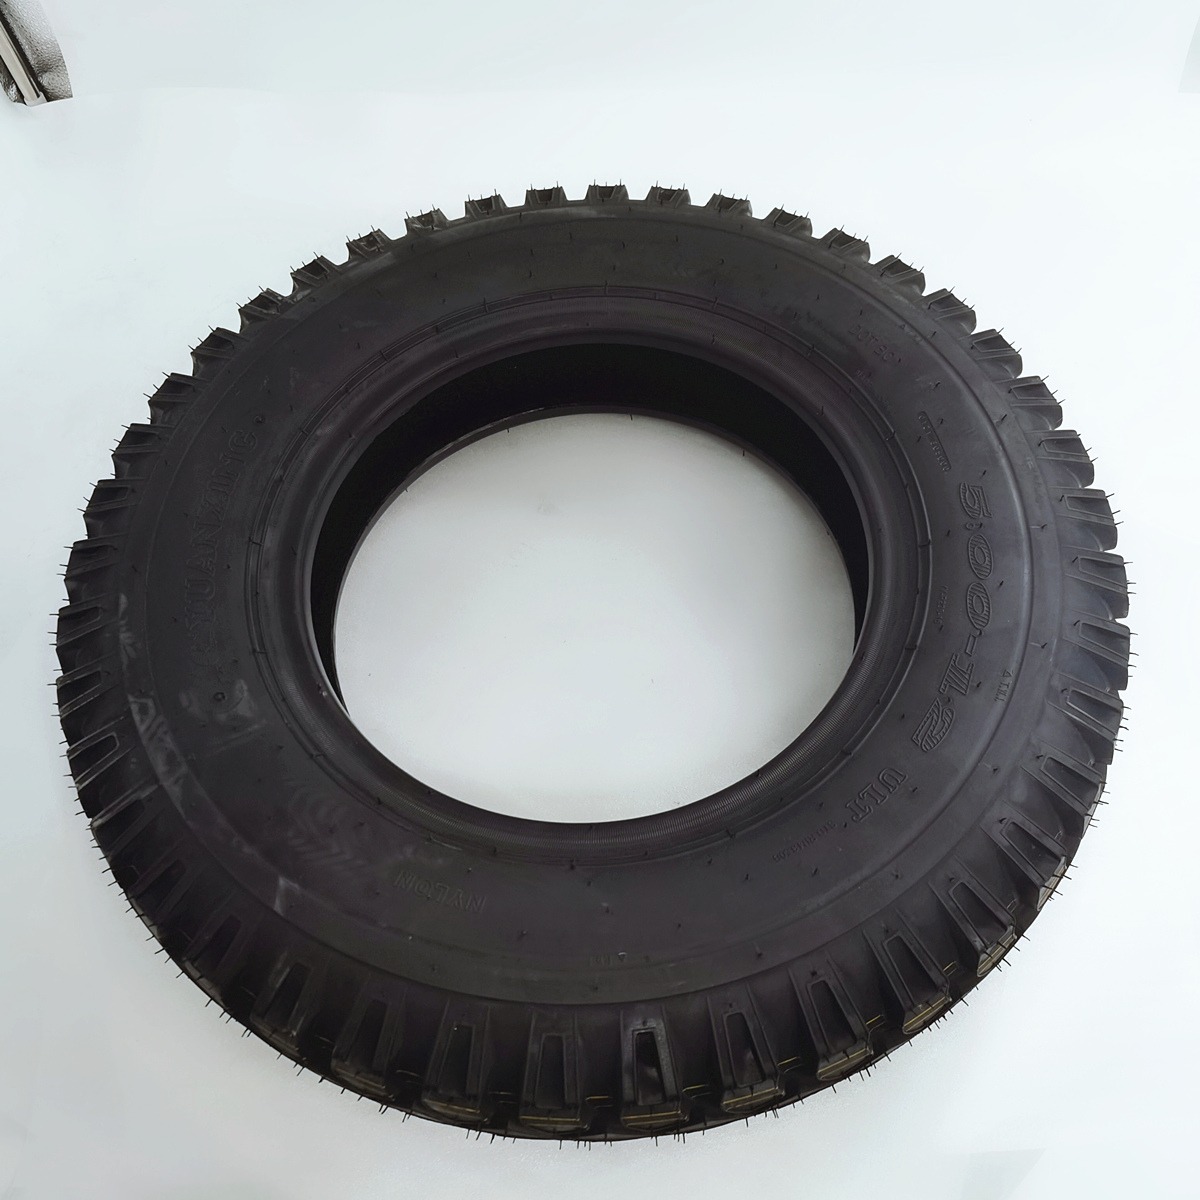 Professional Manufacture Durable Tricycle Wheels Rubber Chinese Passenger Car Tyre Tire Casing Natural First-class 128 Countries